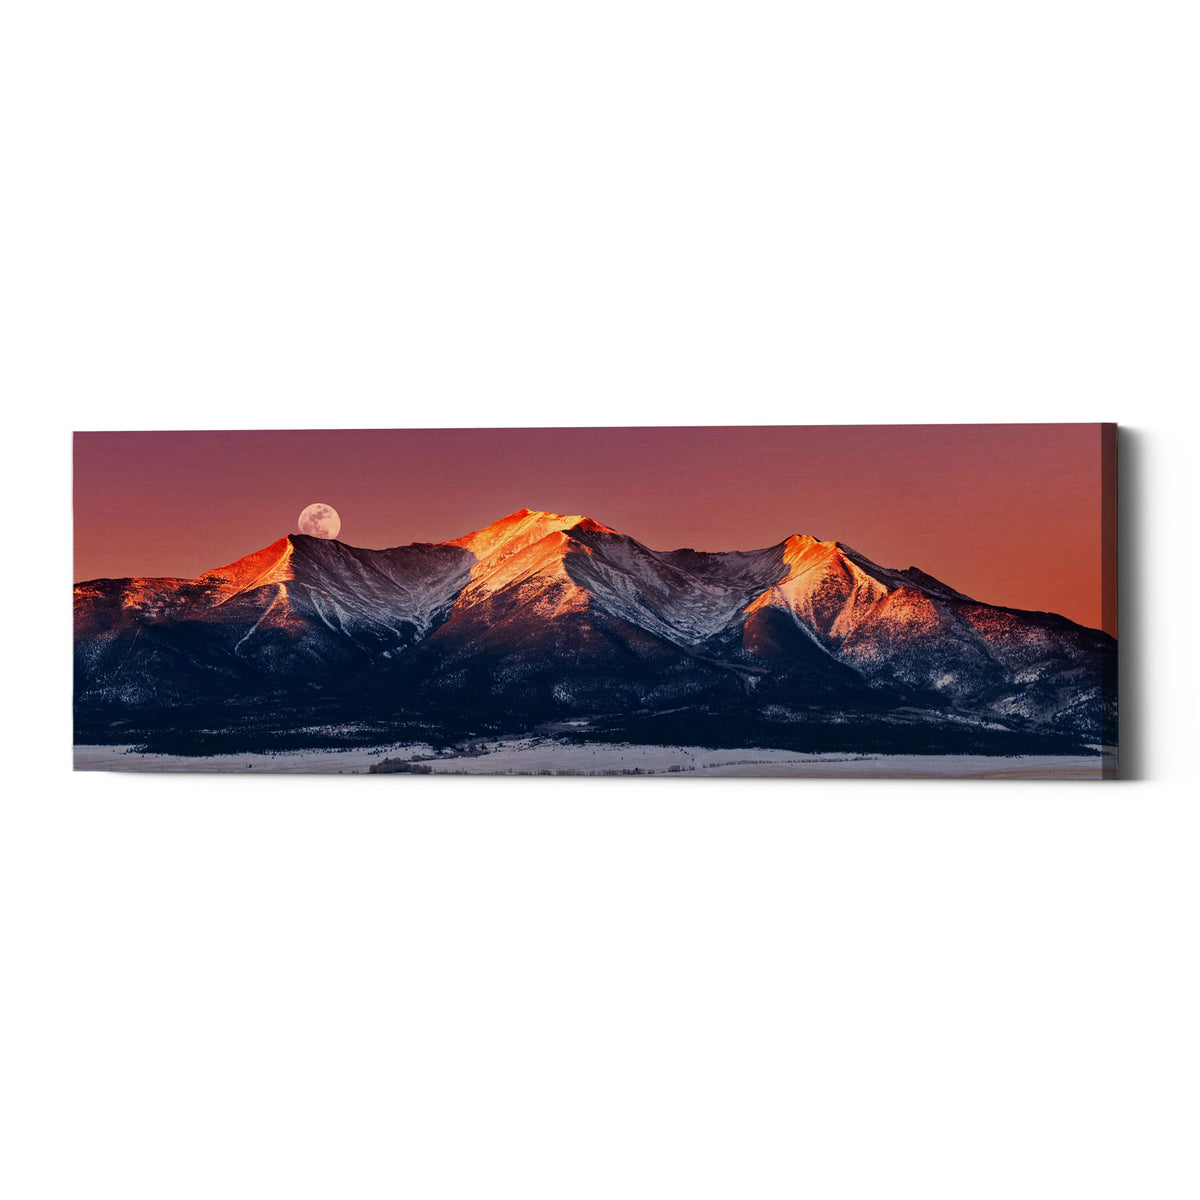 Epic Graffiti &quot;Mount Princeton Moonset&quot; by Darren White, Giclee Canvas Wall Art